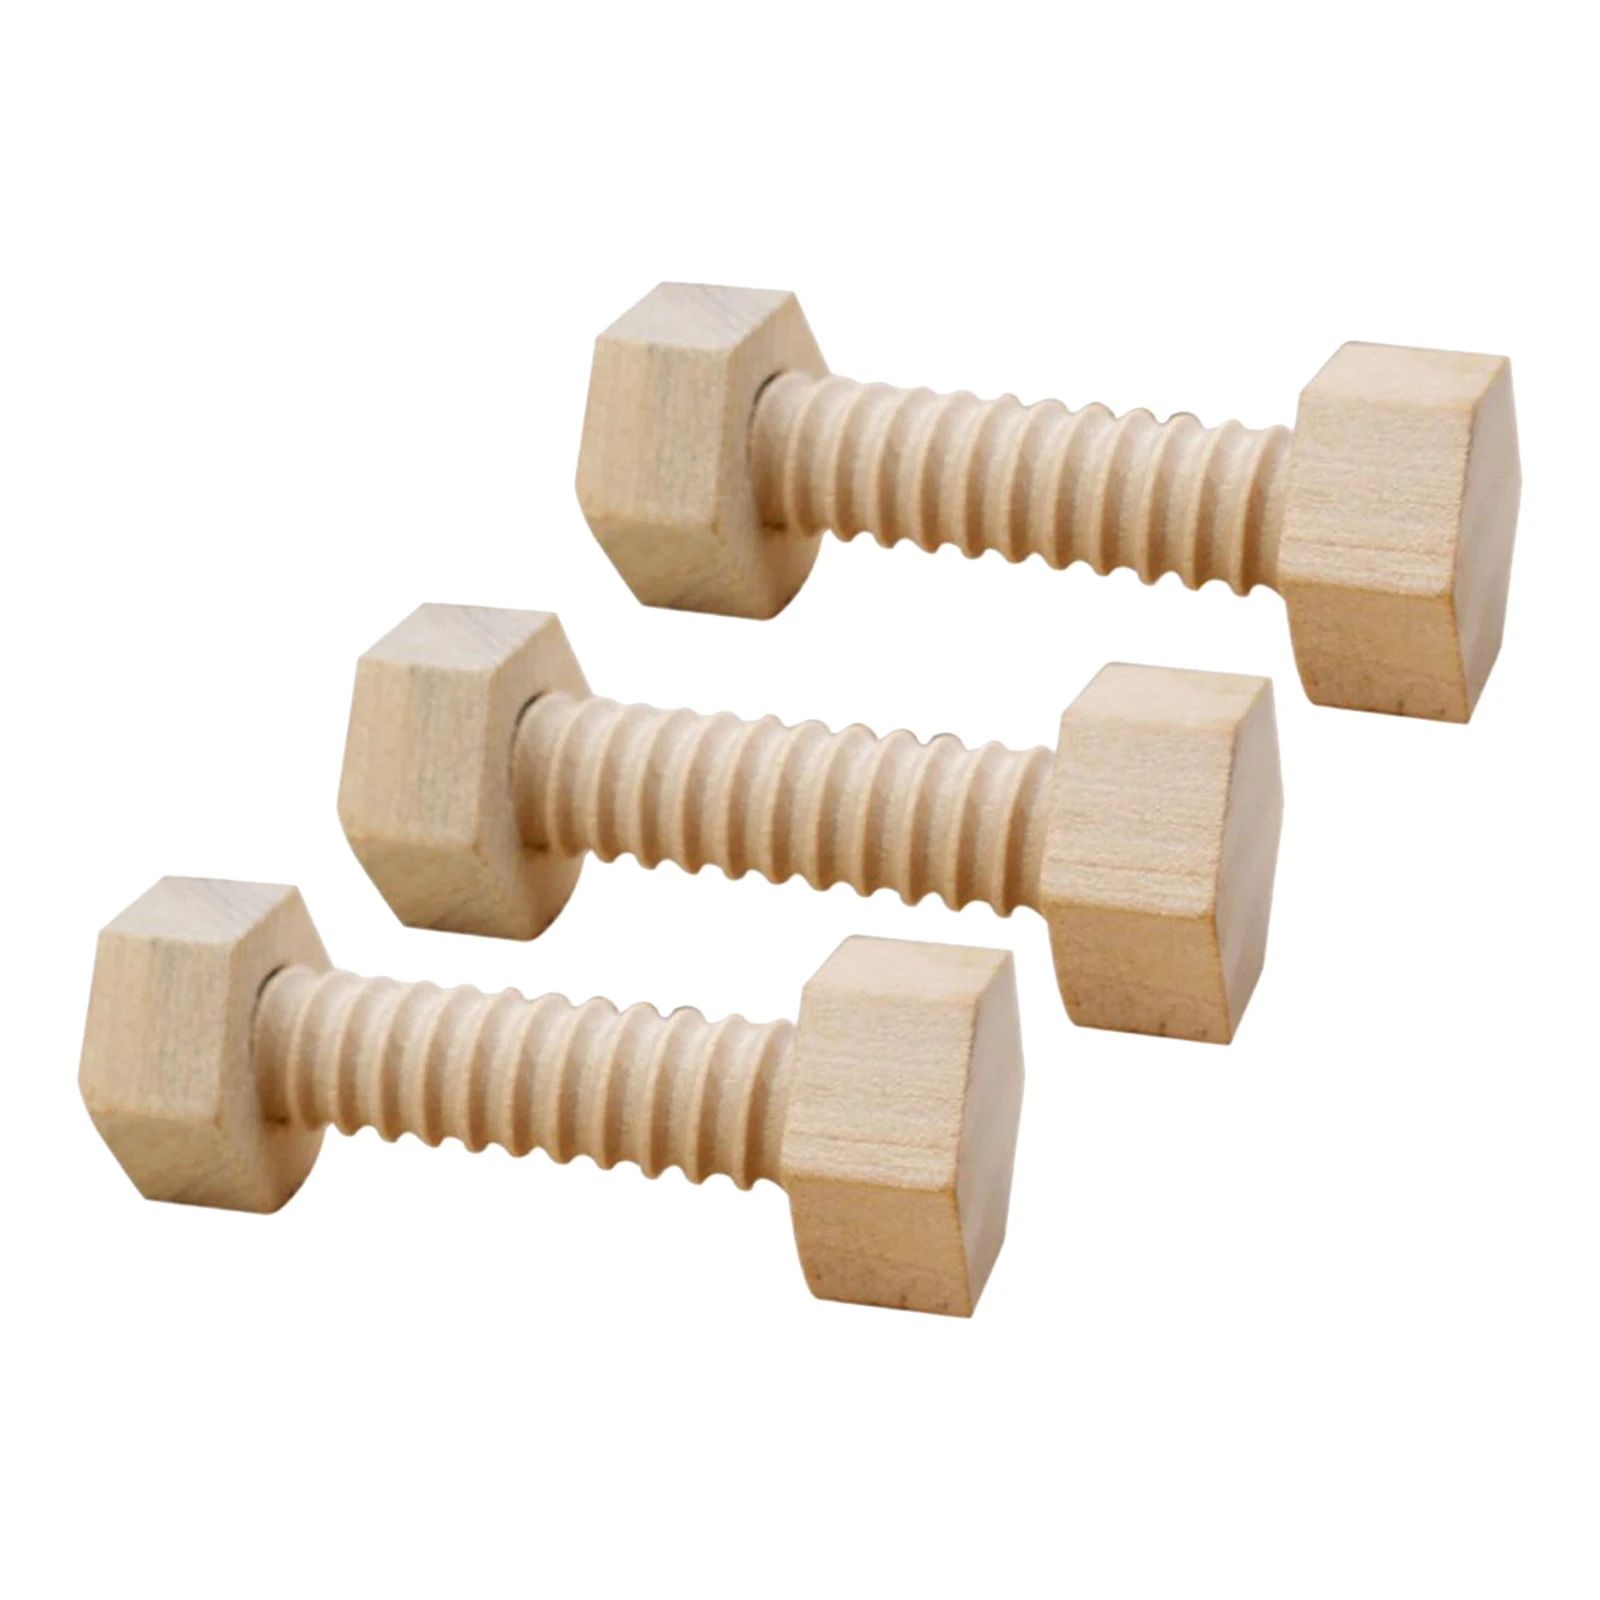 3Pcs Kids Educational Toys Assembling Wooden Toy Wood Screw Nut Hands-on Toy